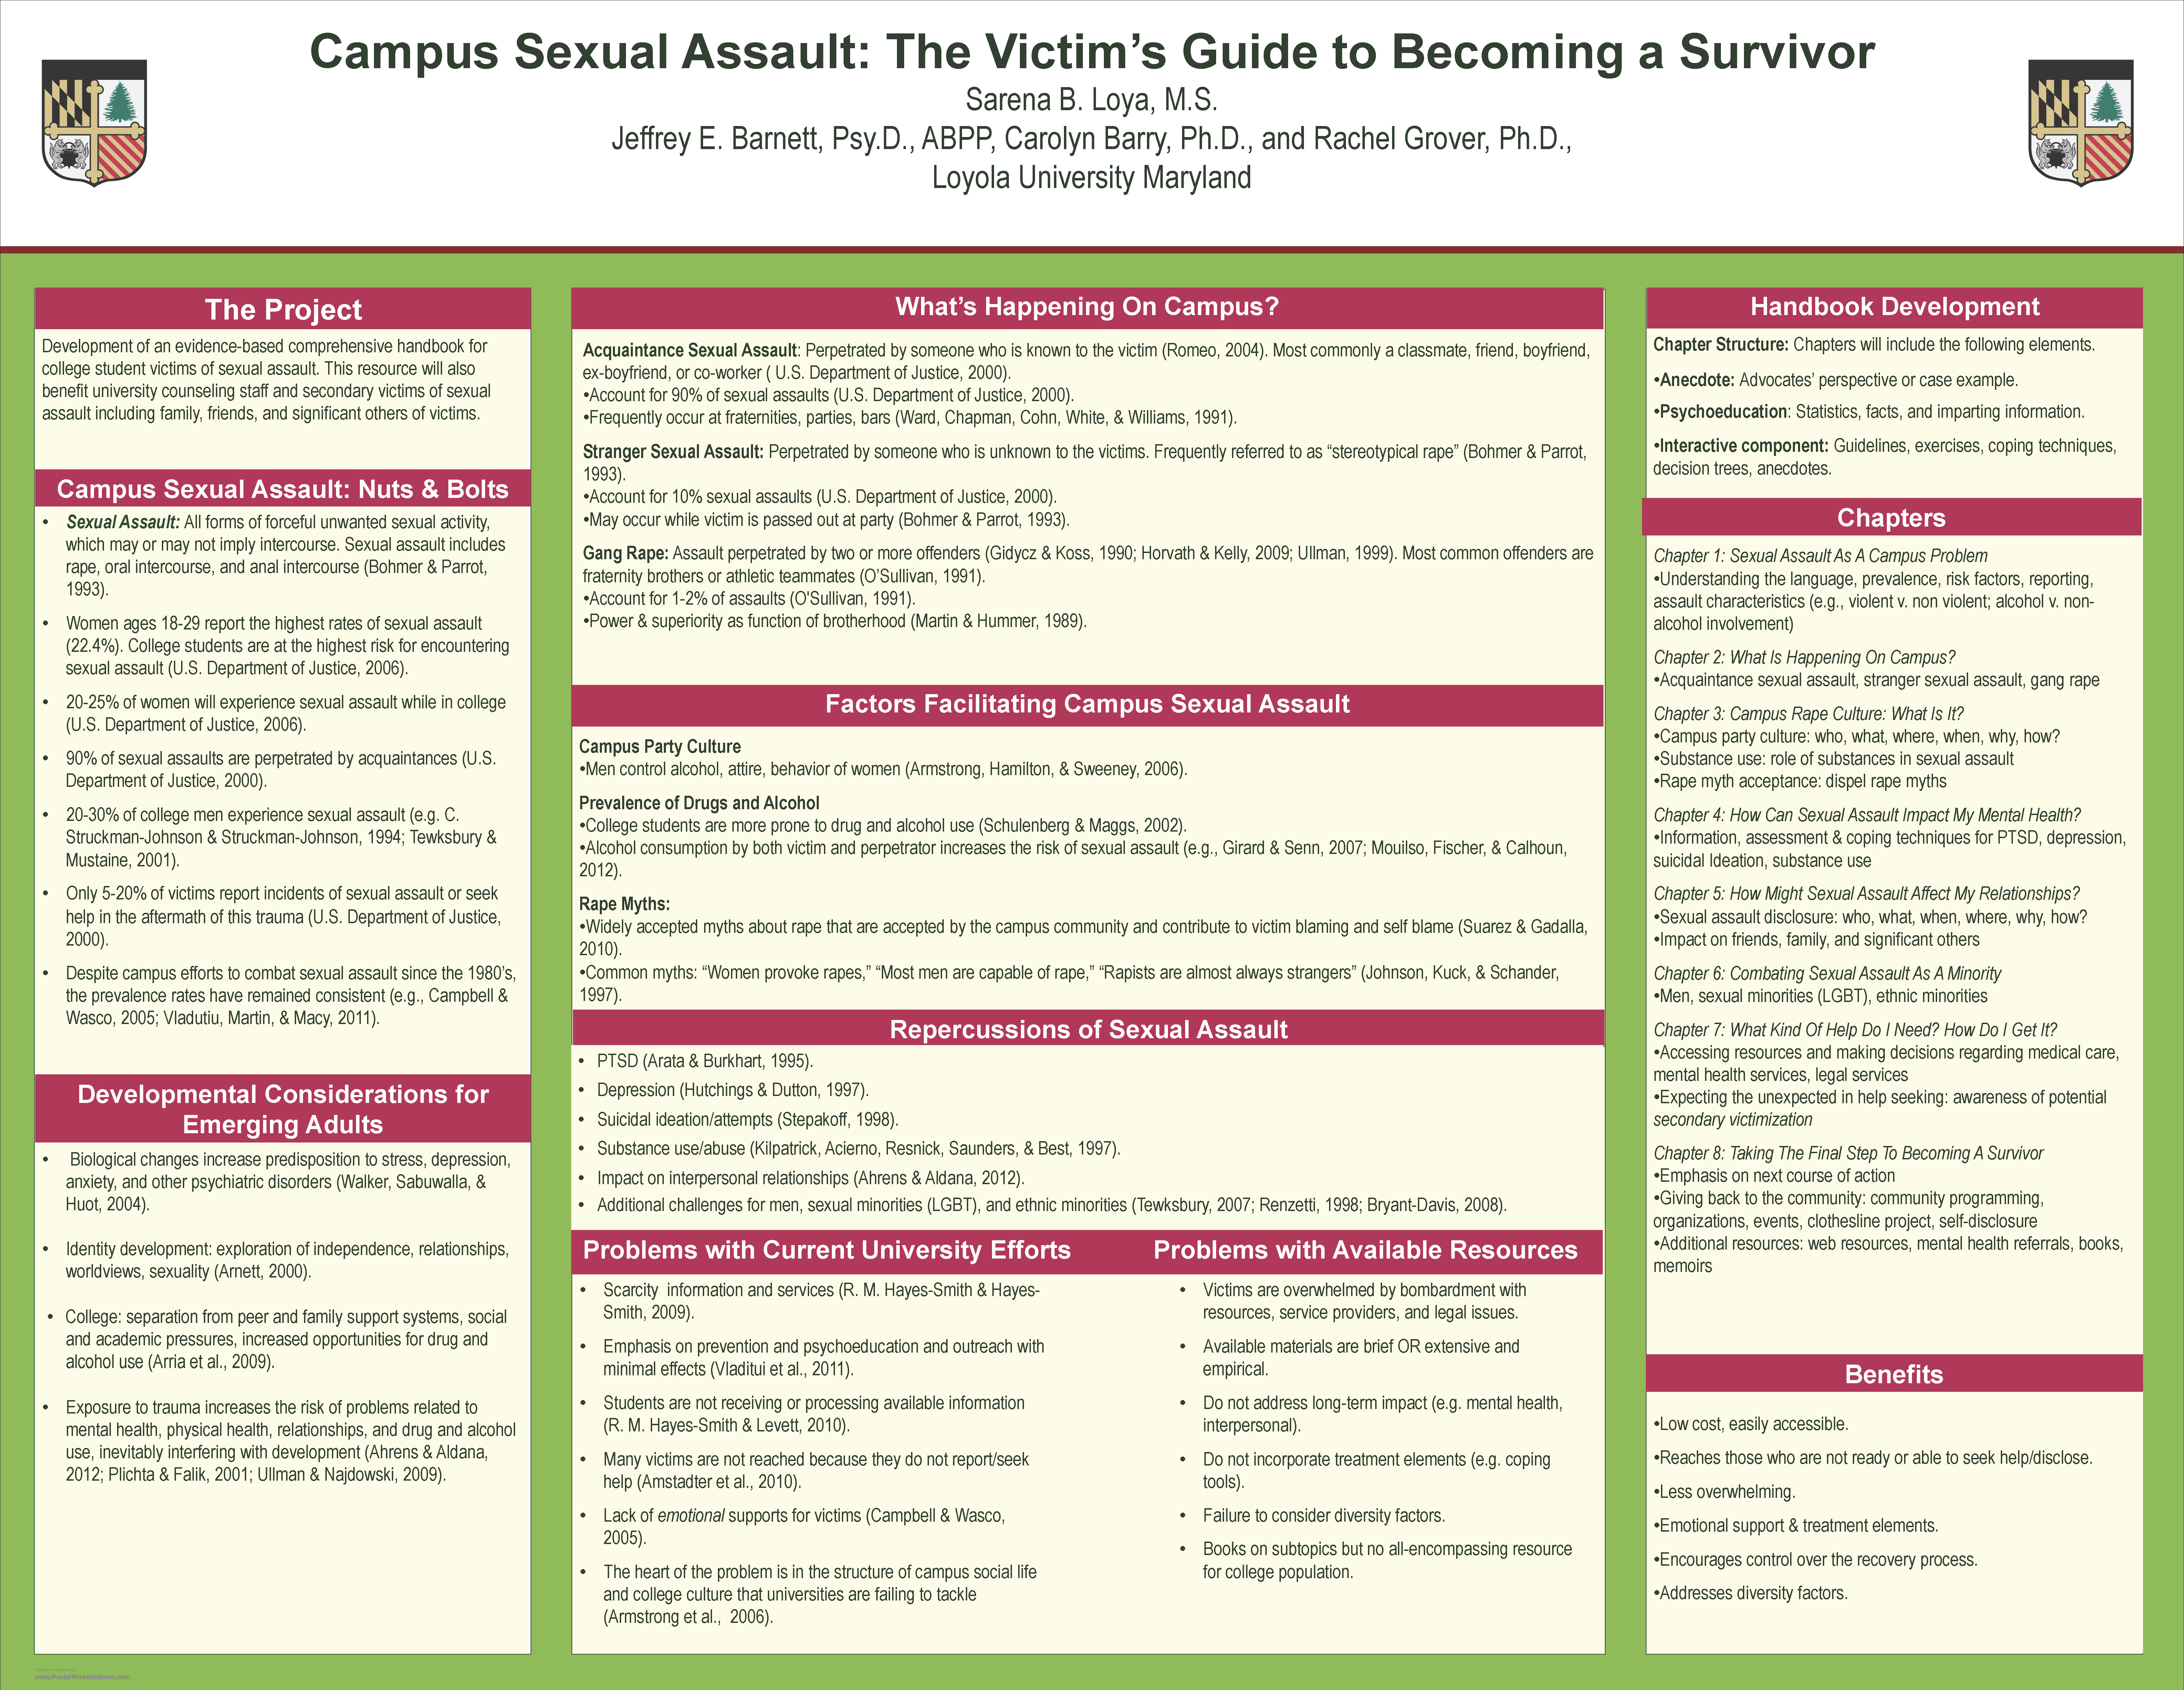 Enlarged poster image: Campus Sexual Assault: The Victim’s Guide to Becoming a Survivor